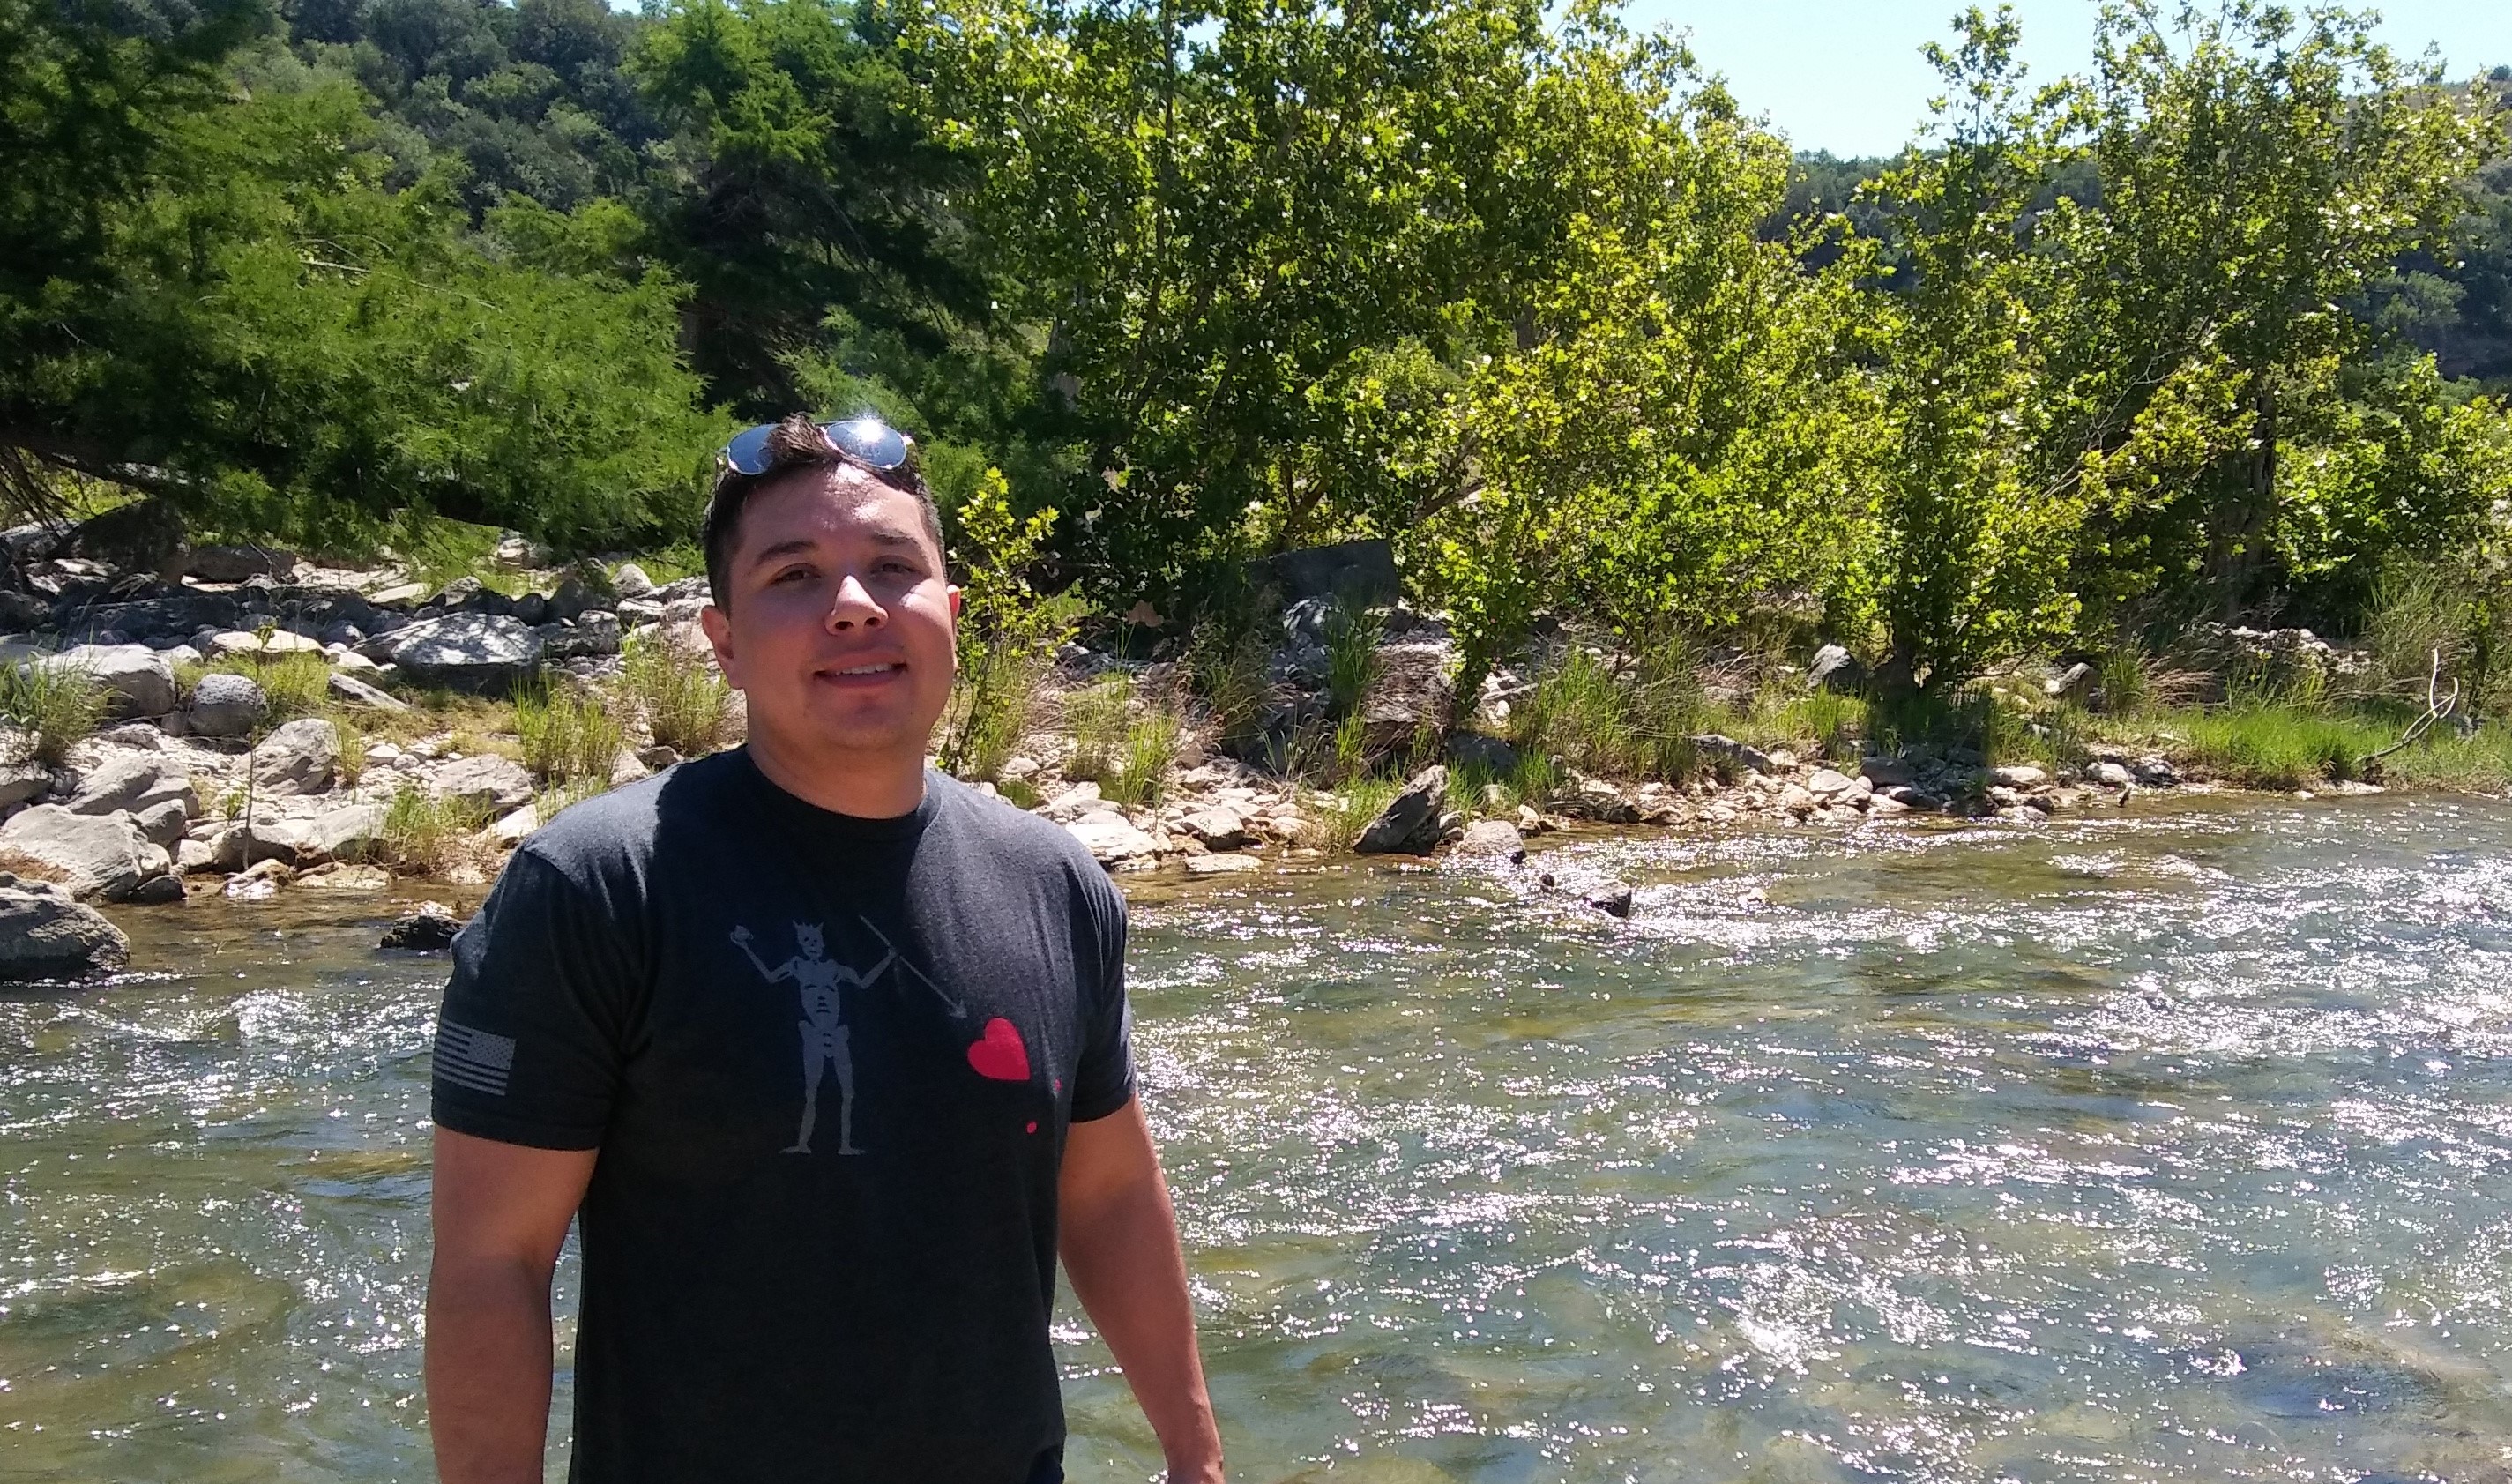 Edward standing in front of a creek at a state park